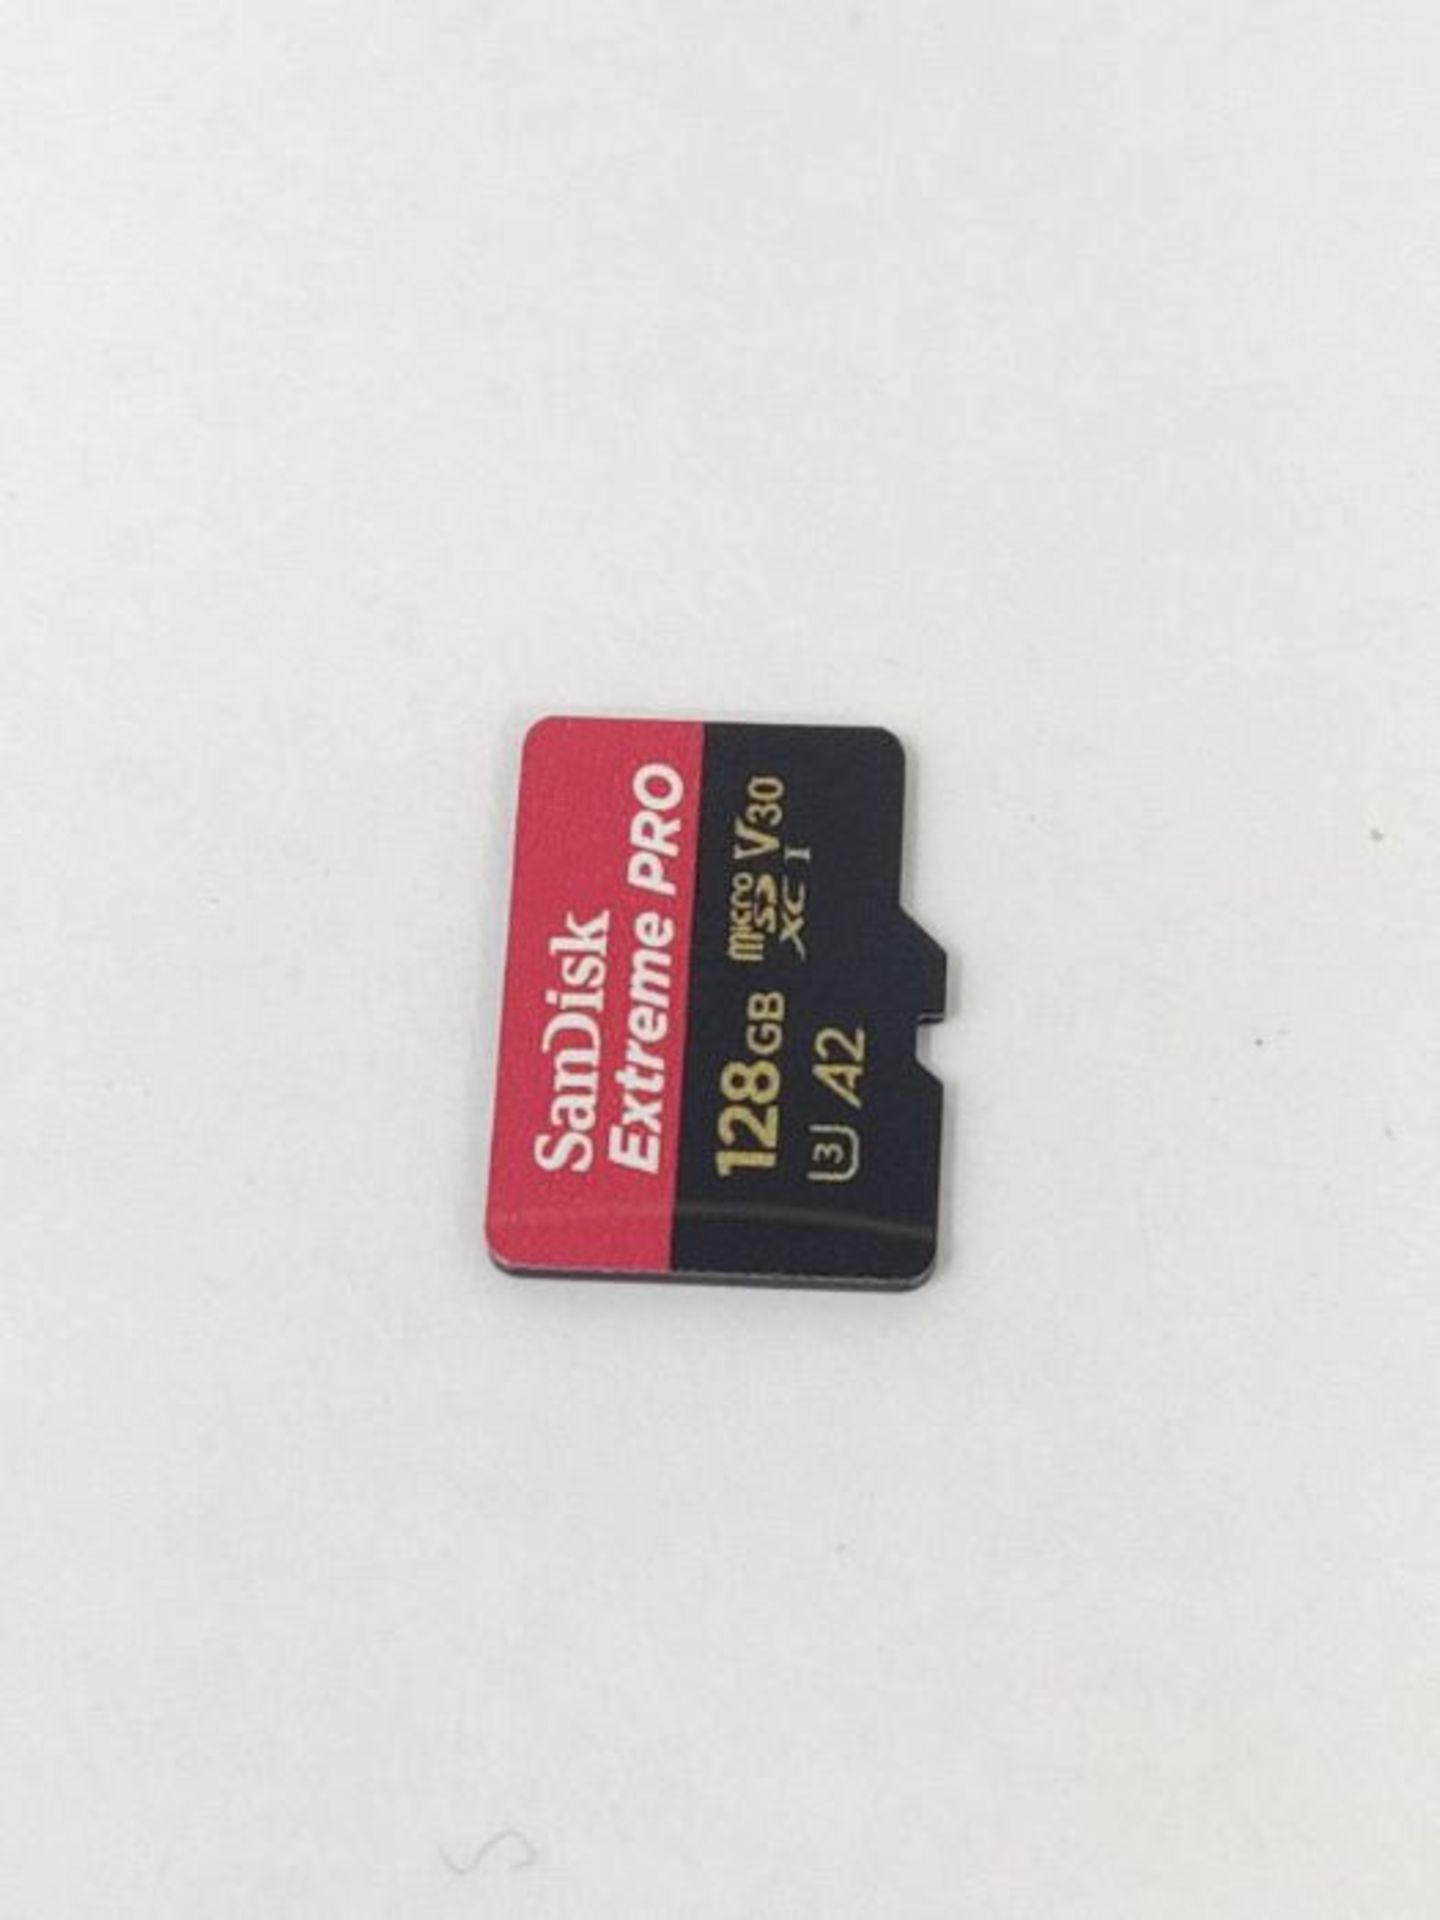 SanDisk Extreme Pro 128GB microSDXC Memory Card + SD Adapter with A2 App Performance + - Image 2 of 2